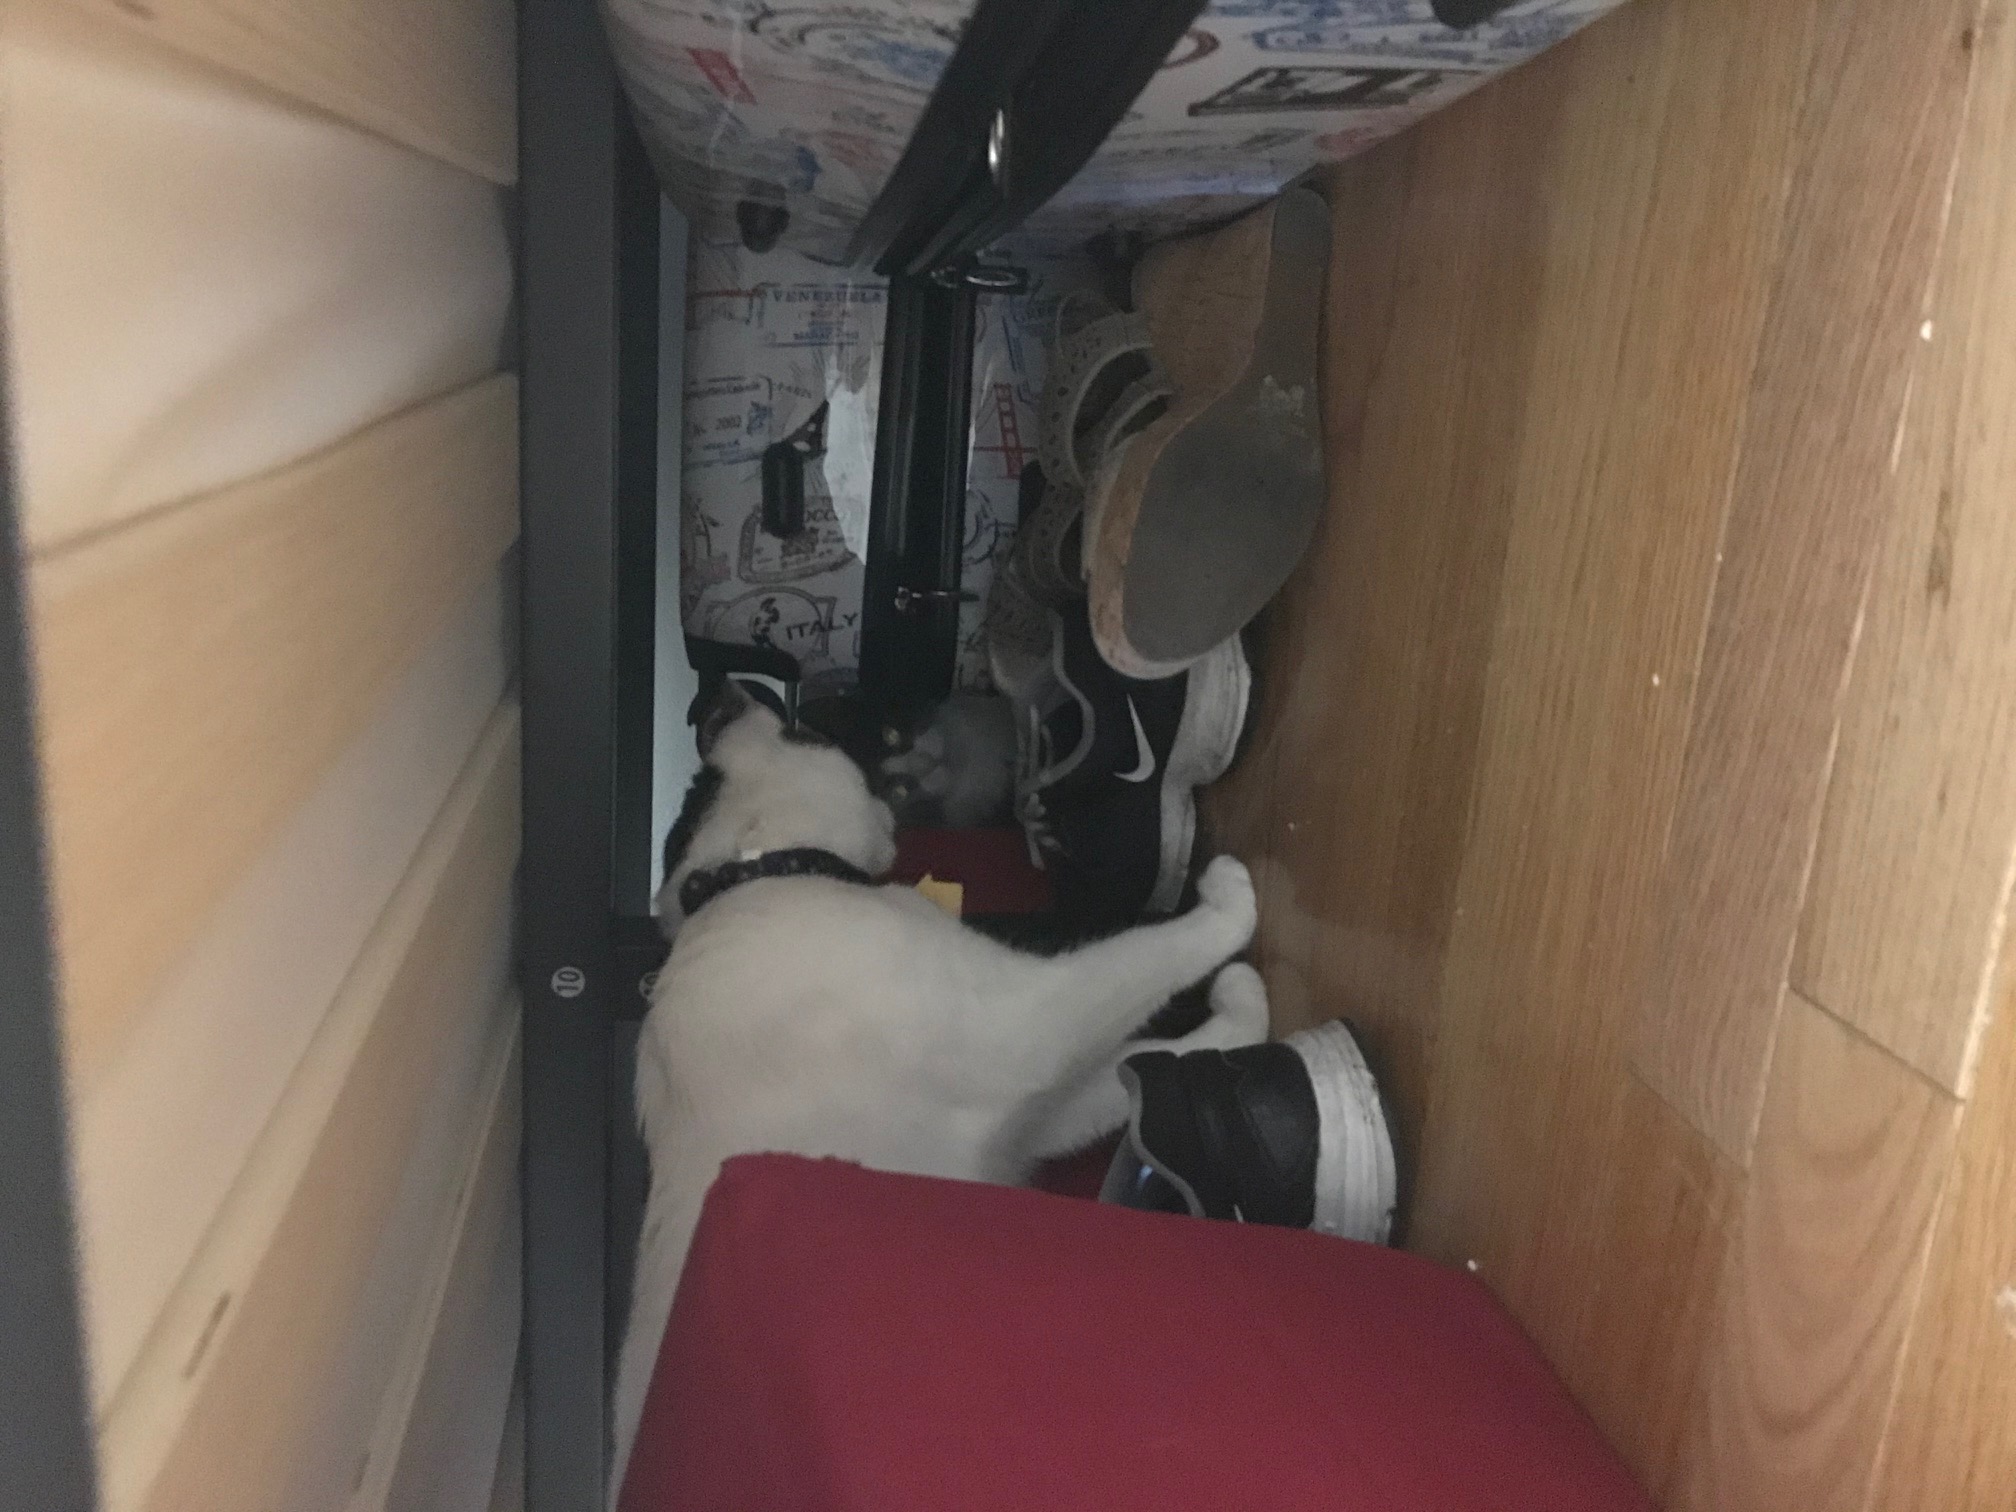 A gray-and-white cat hides under a bed while a white cat with tabby splotches looks at her with curiosity.